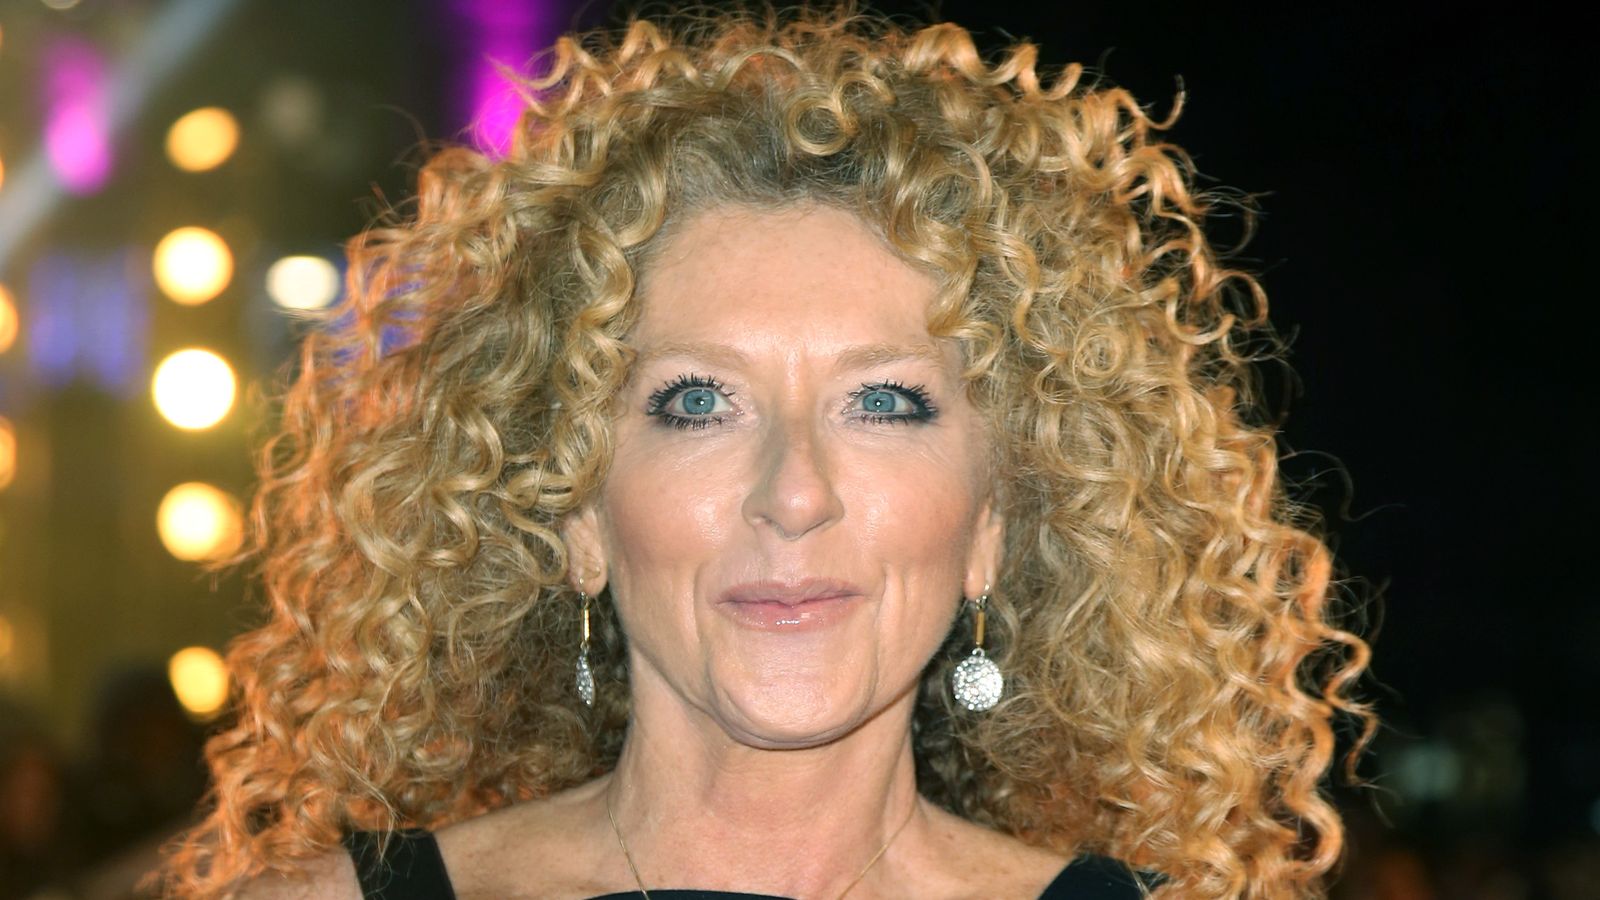 Ex-Dragons' Den star Kelly Hoppen reveals breast cancer diagnosis after avoiding mammograms for eight years